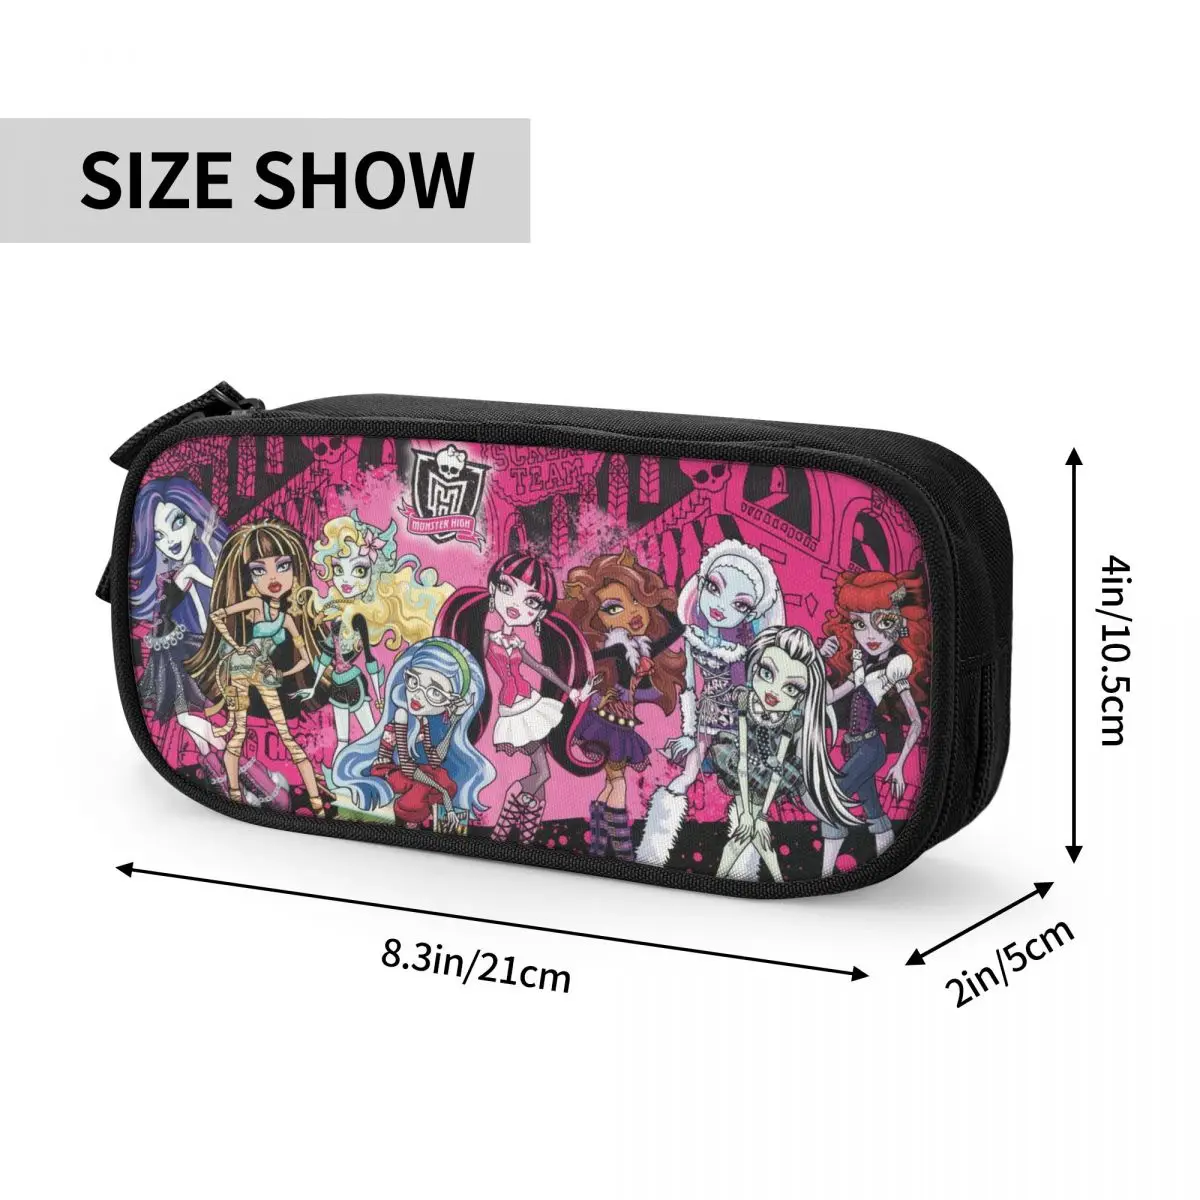 Fun Monster High Collage Pencil Case Anime Pencilcases Pen Holder for Student Big Capacity Bag Office Zipper Accessories images - 6